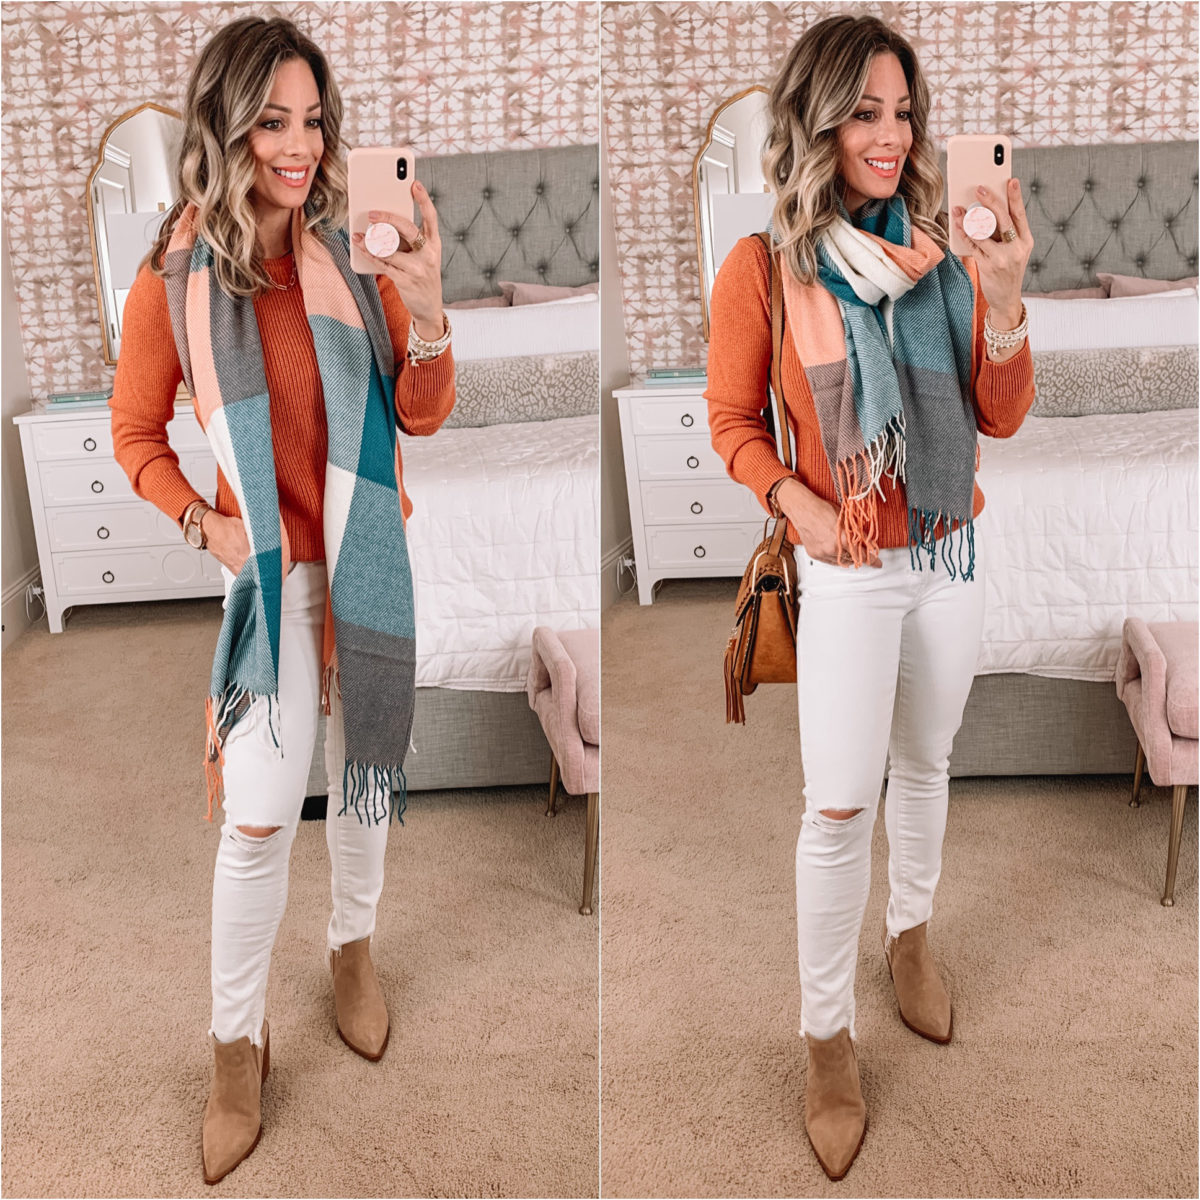 Amazon Fashion Faves, Sweater, Scarf, Skinny Jeans White, Booties 